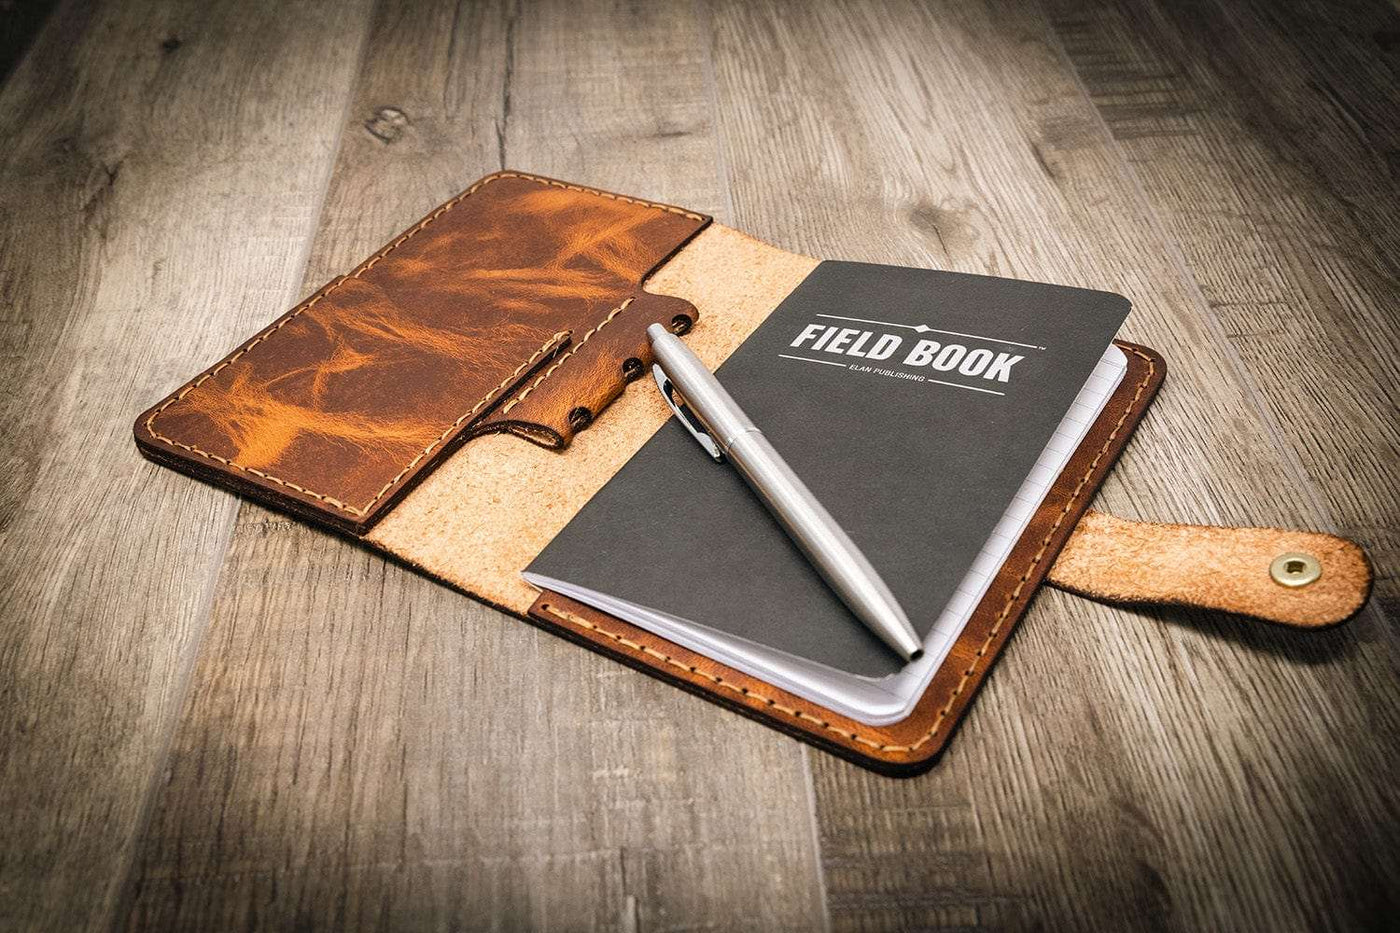 Field notebook, chestnut leather journal cover